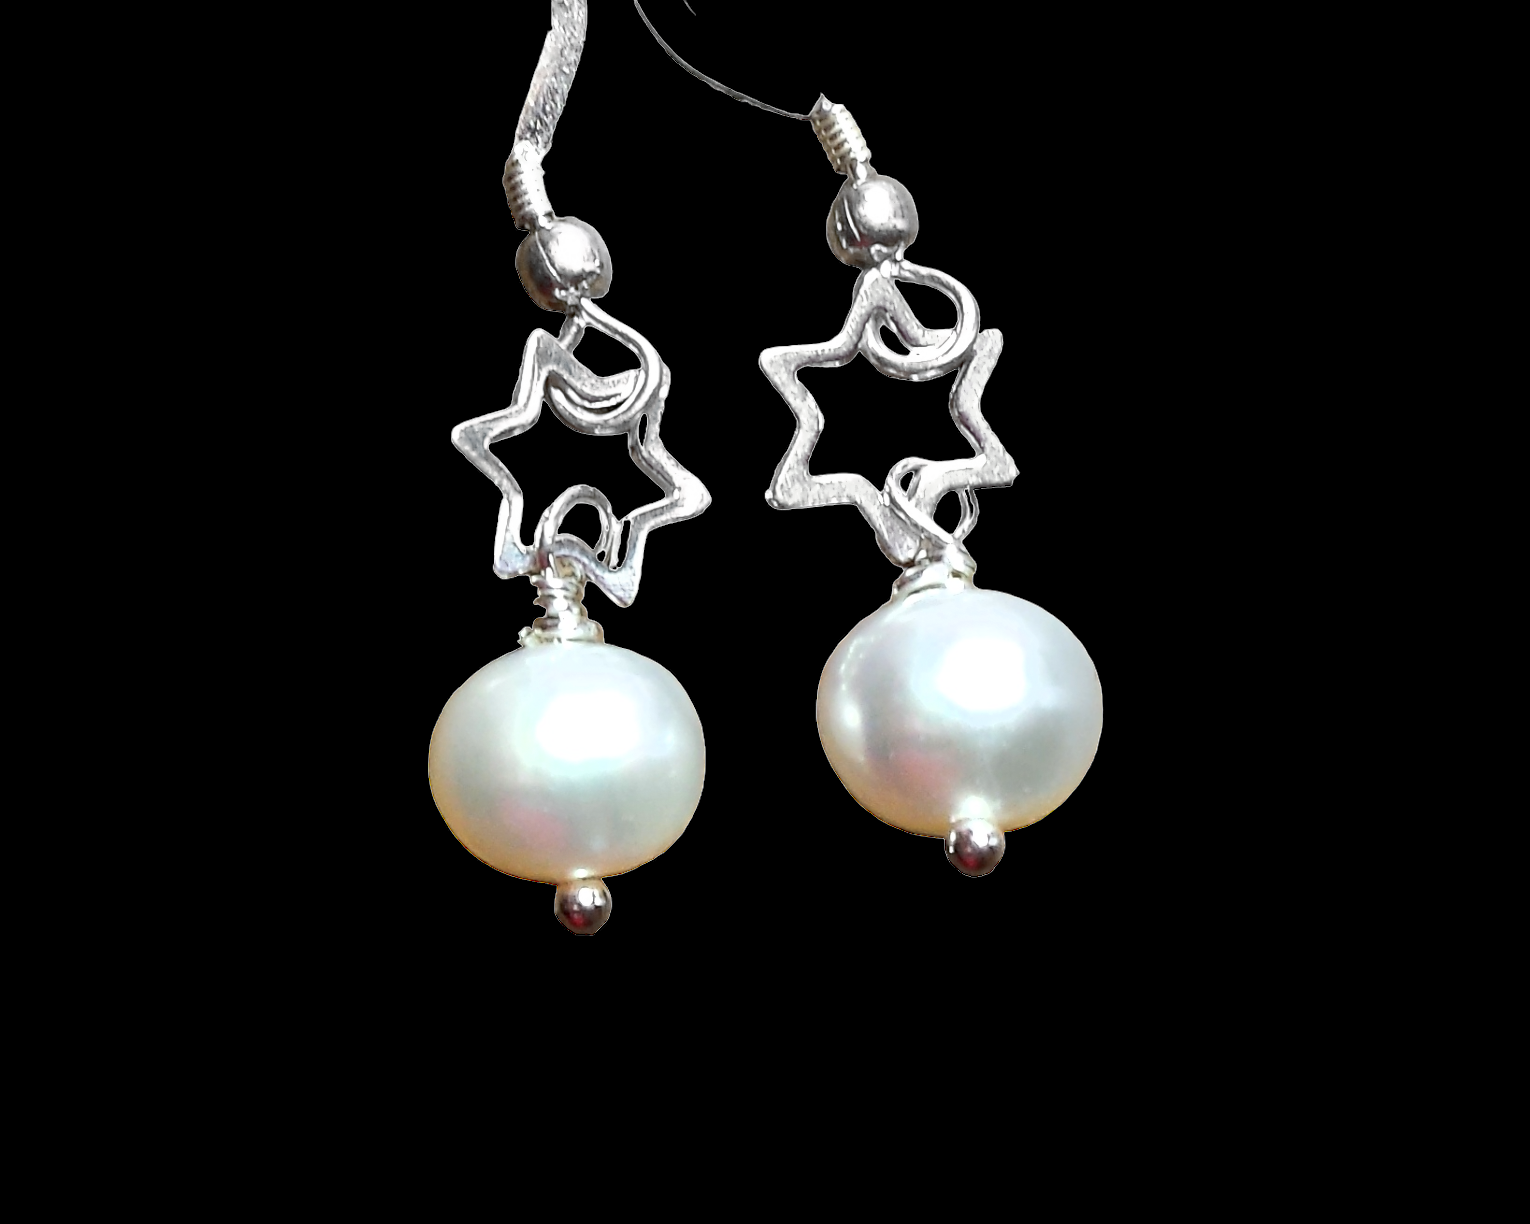 Reach for the Stars Pearl Earrings-Handcrafted Sterling Silver Stars & White Freshwater Cultured Pearls-Star of David